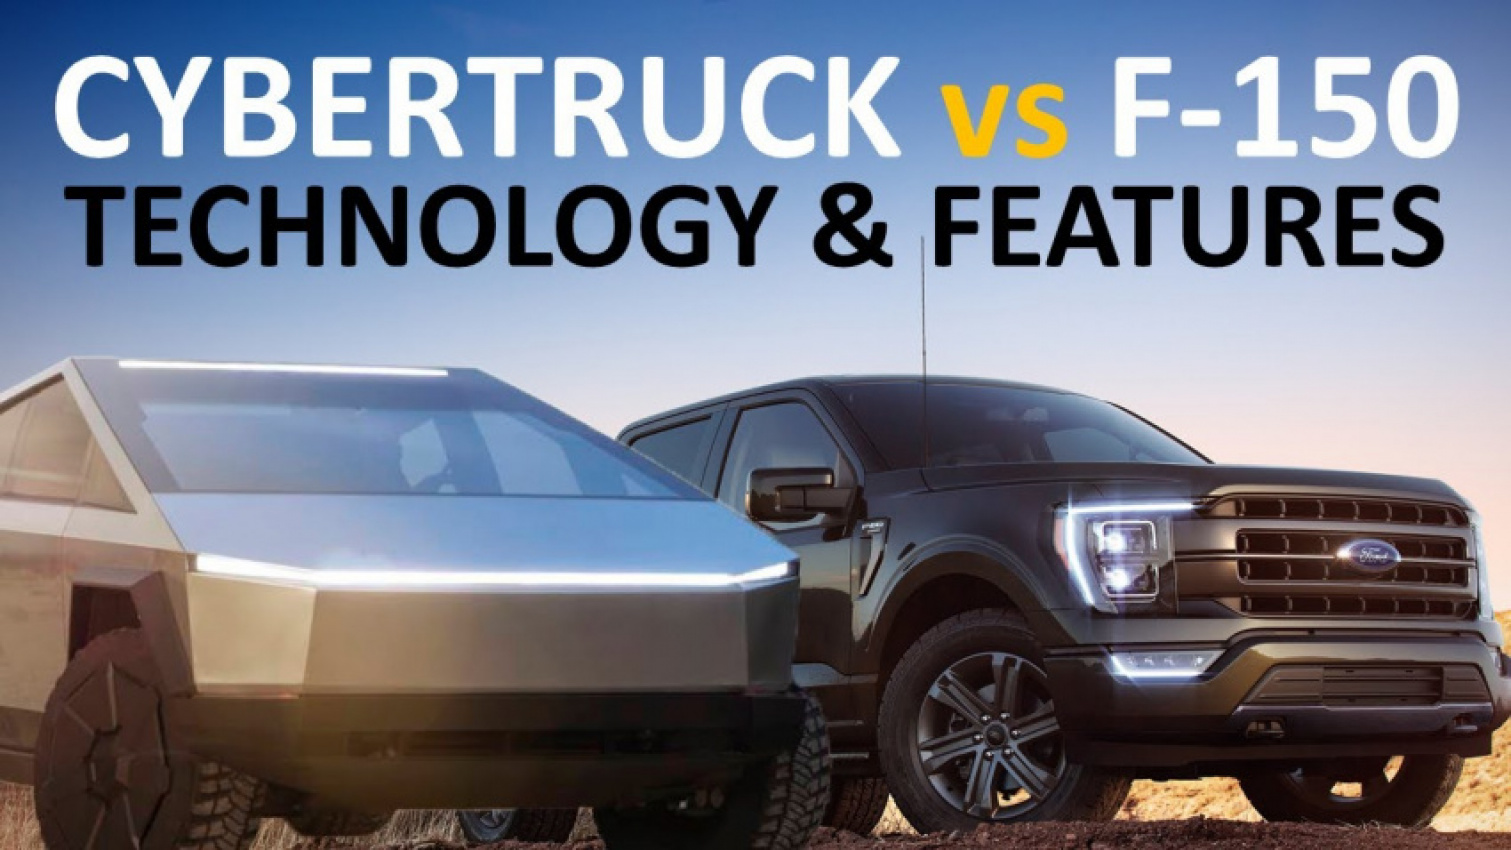 autos, cars, ford, tesla, 2021 f150, 2021 ford f150, amazon, cyber truck, cybertruck, cybertruck cost, electric truck, electric trucks, elon musk, ev truck, f-150, f-150 vs cybertruck, ford f-150, ford f150 reveal, ford truck, ford vs cybertruck, new f-150, new f150, tesla cybertruck, tesla pickup truck, tesla review, tesla review video, tesla truck, tesla truck cost, tesla video, tesla's truck, amazon, tesla cybertruck vs 2021 ford f-150: how does ford's newest truck compare to tesla's truck?